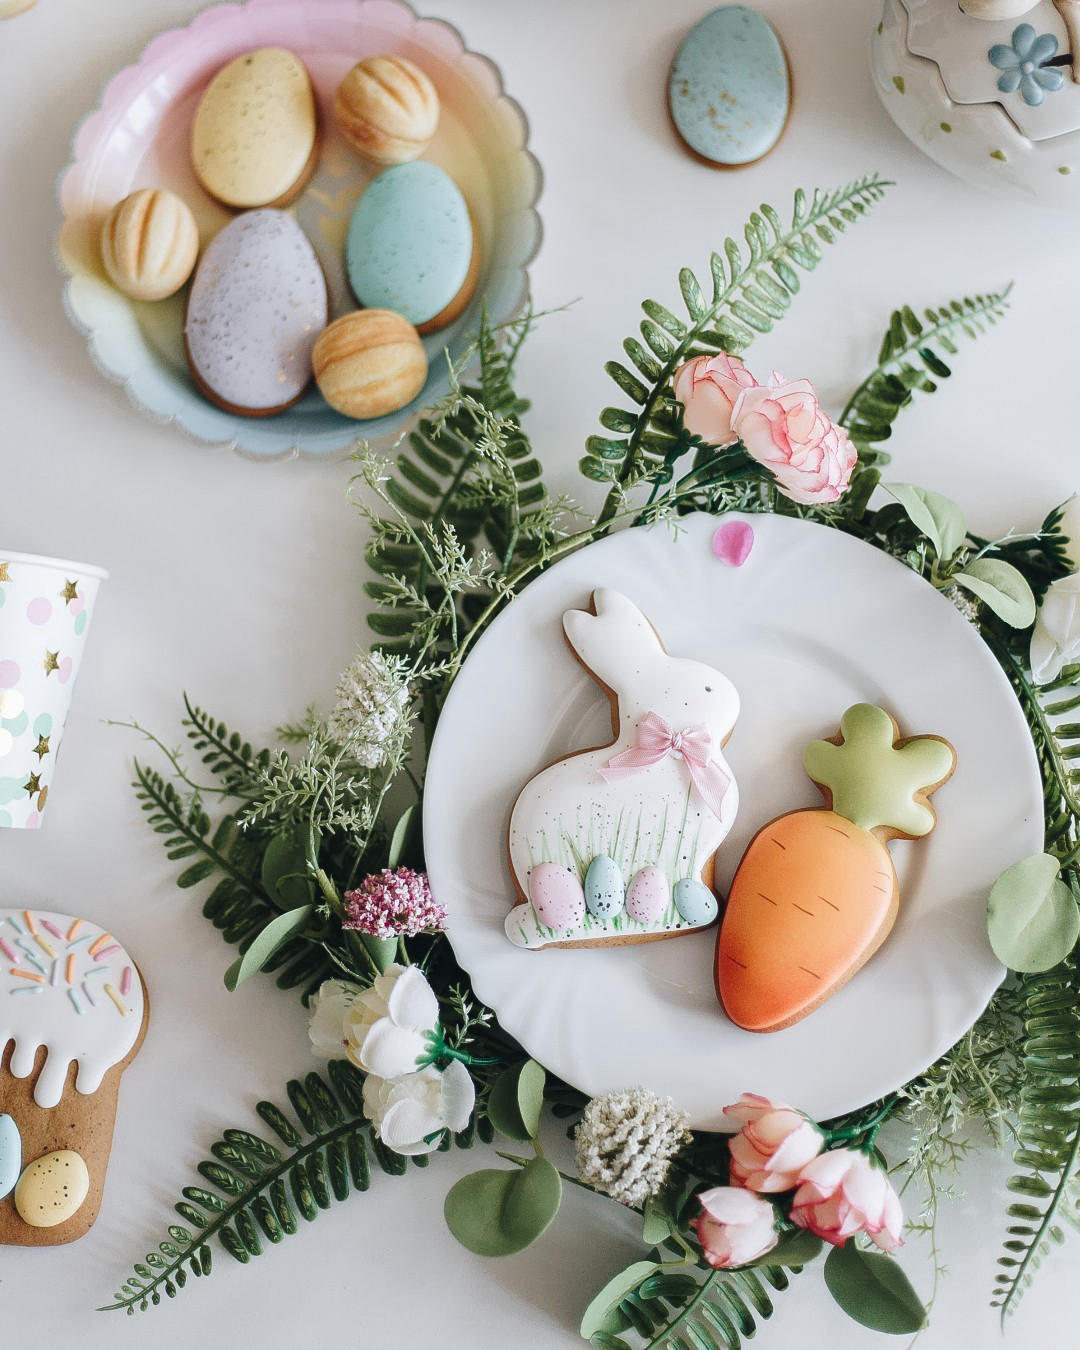 Happy Easter from all of us at Four Seasons Hotel Westlake Village